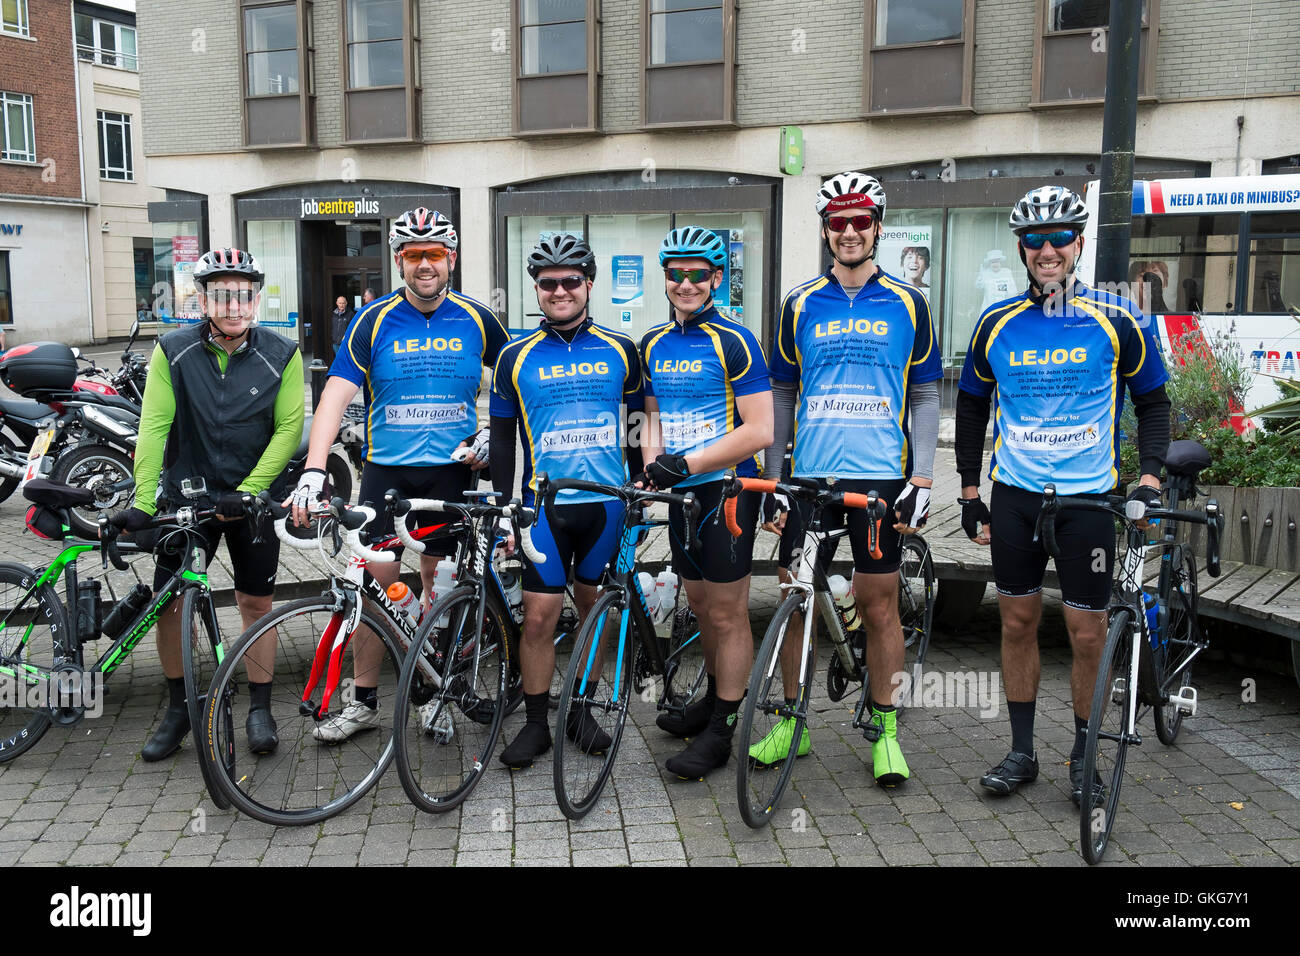 Truro, Cornwall. 20th August, 2016.  Six cyclists from Bristol take a well earned break on the first day of their marathon bike ride from Lands End to John O’Groats. Photographer: Gordon Scammell/Alamy Live News. Stock Photo